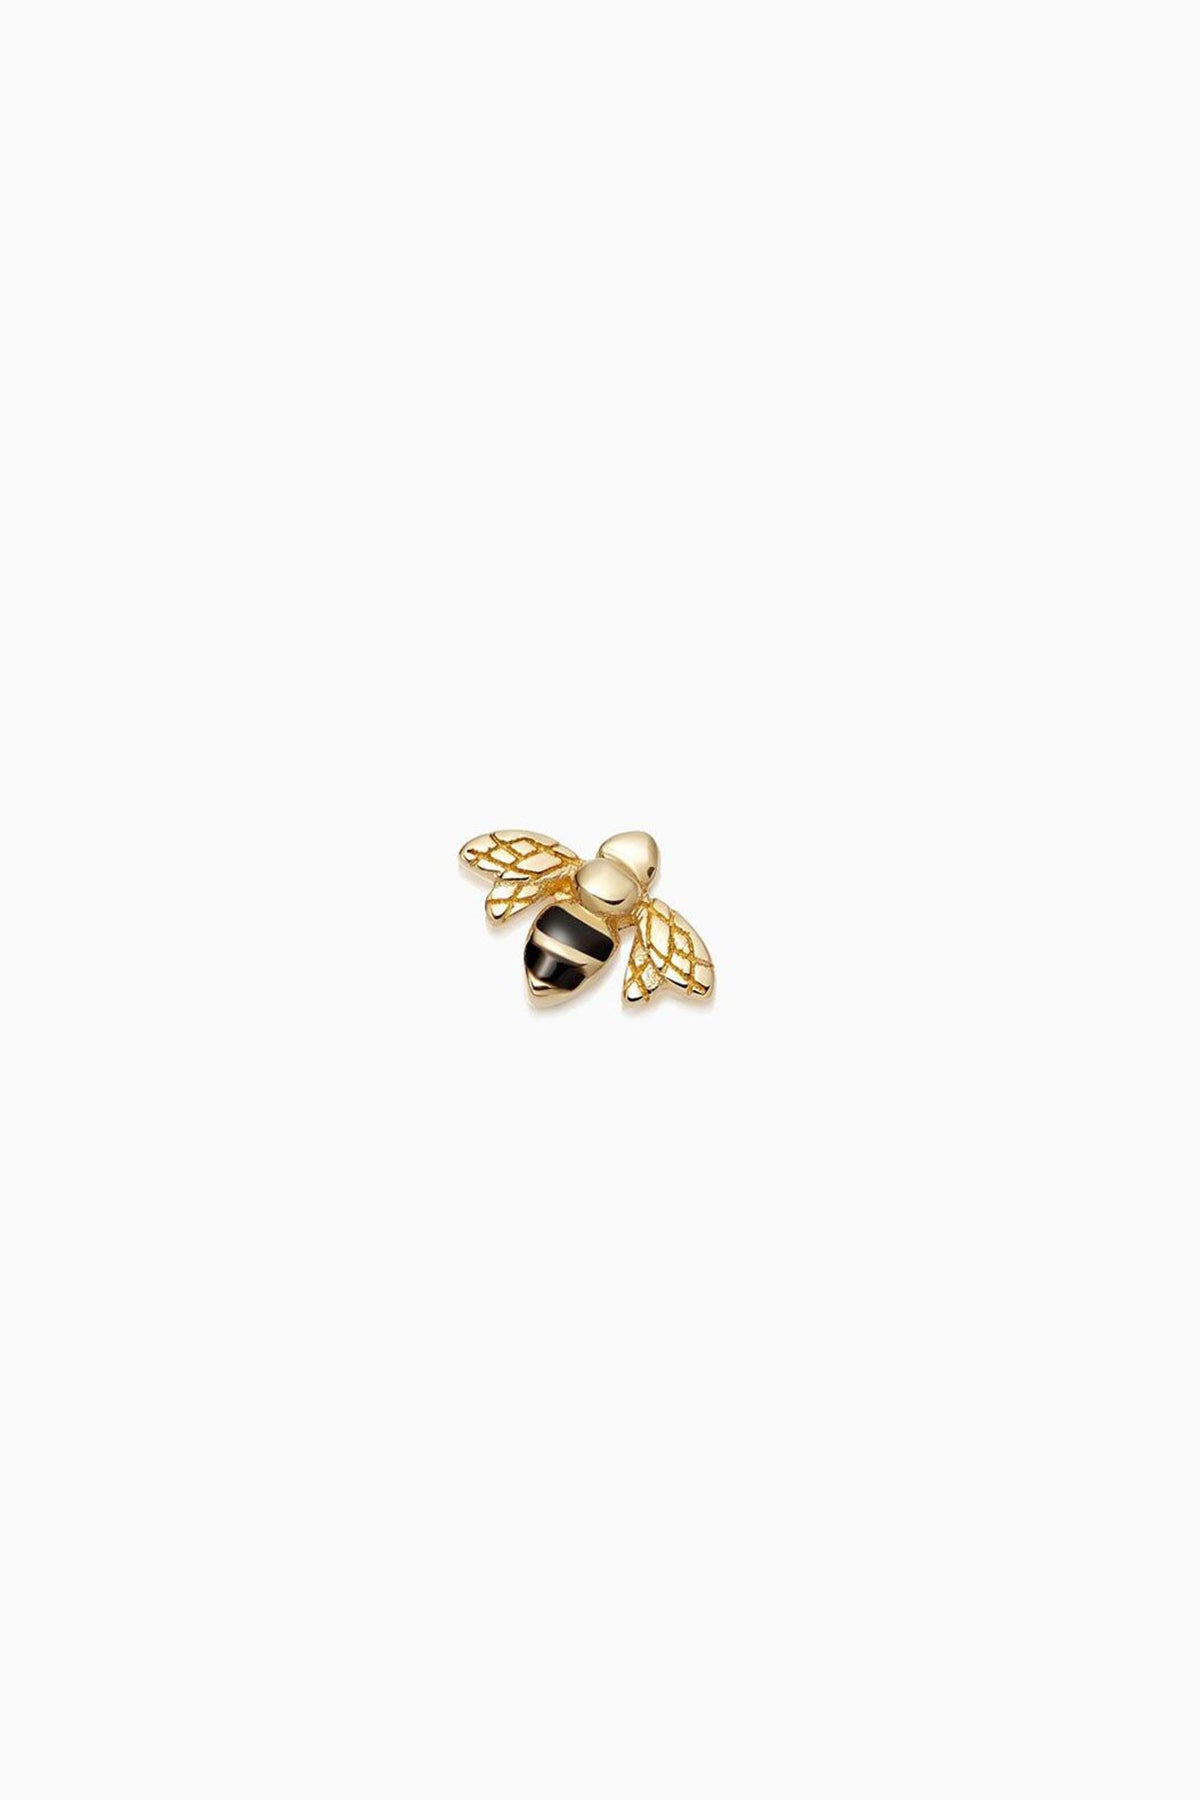 LOQUET LONDON | GOLD BEE CHARM